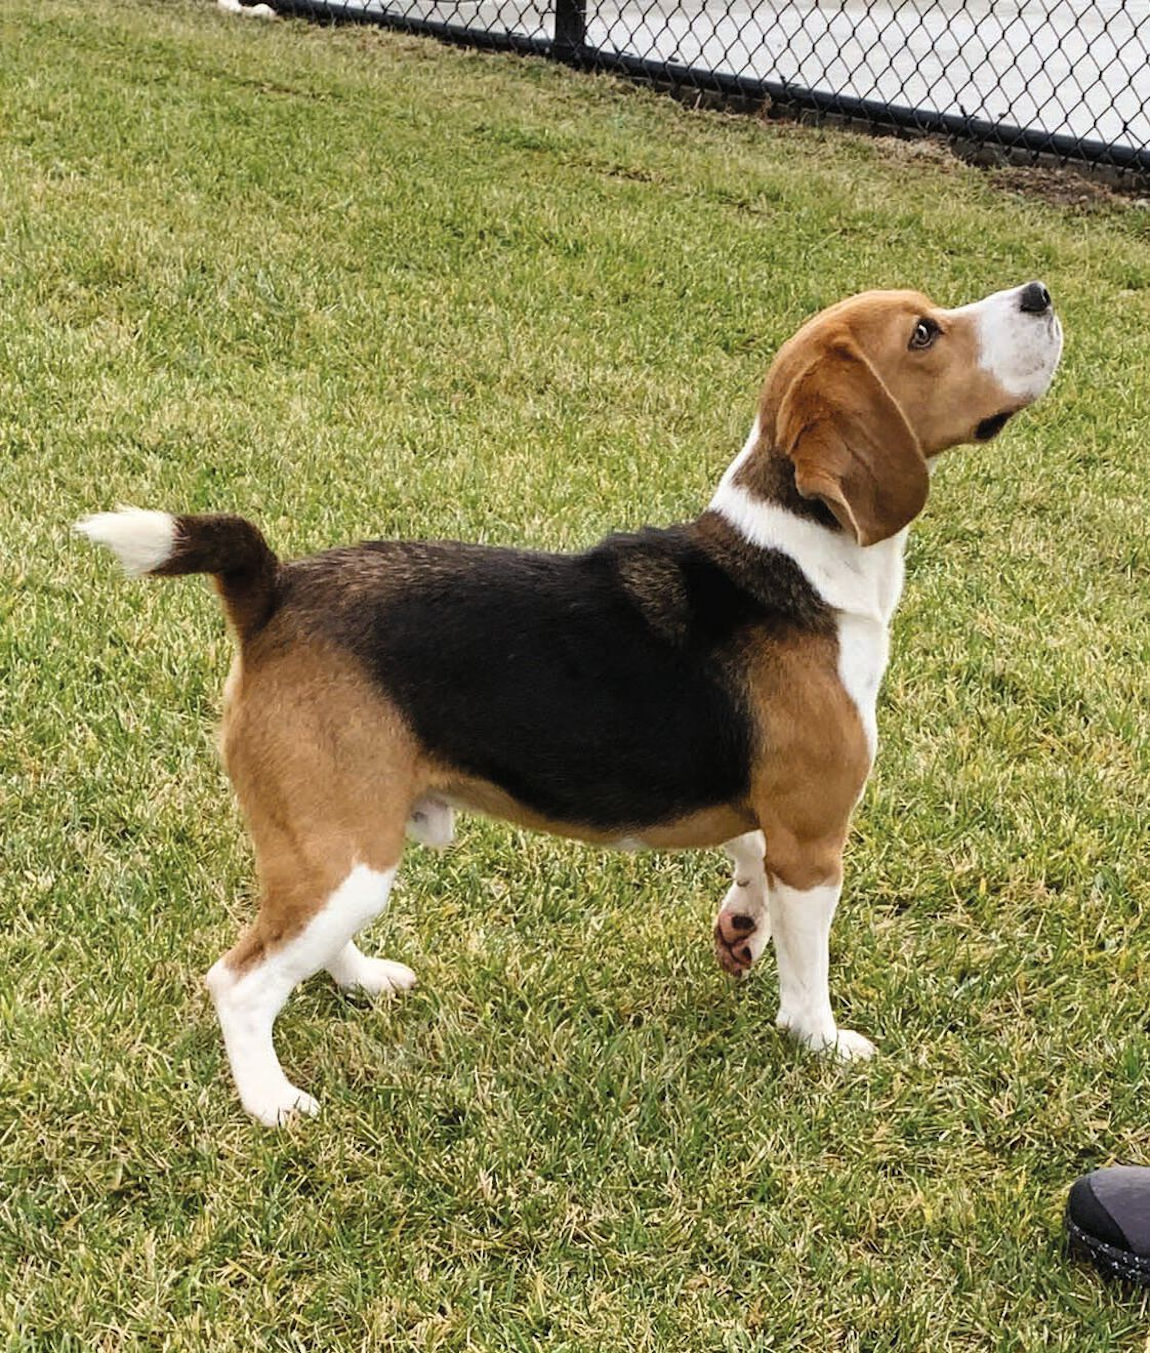 Beagle puppies were selected to assess cognitive function 